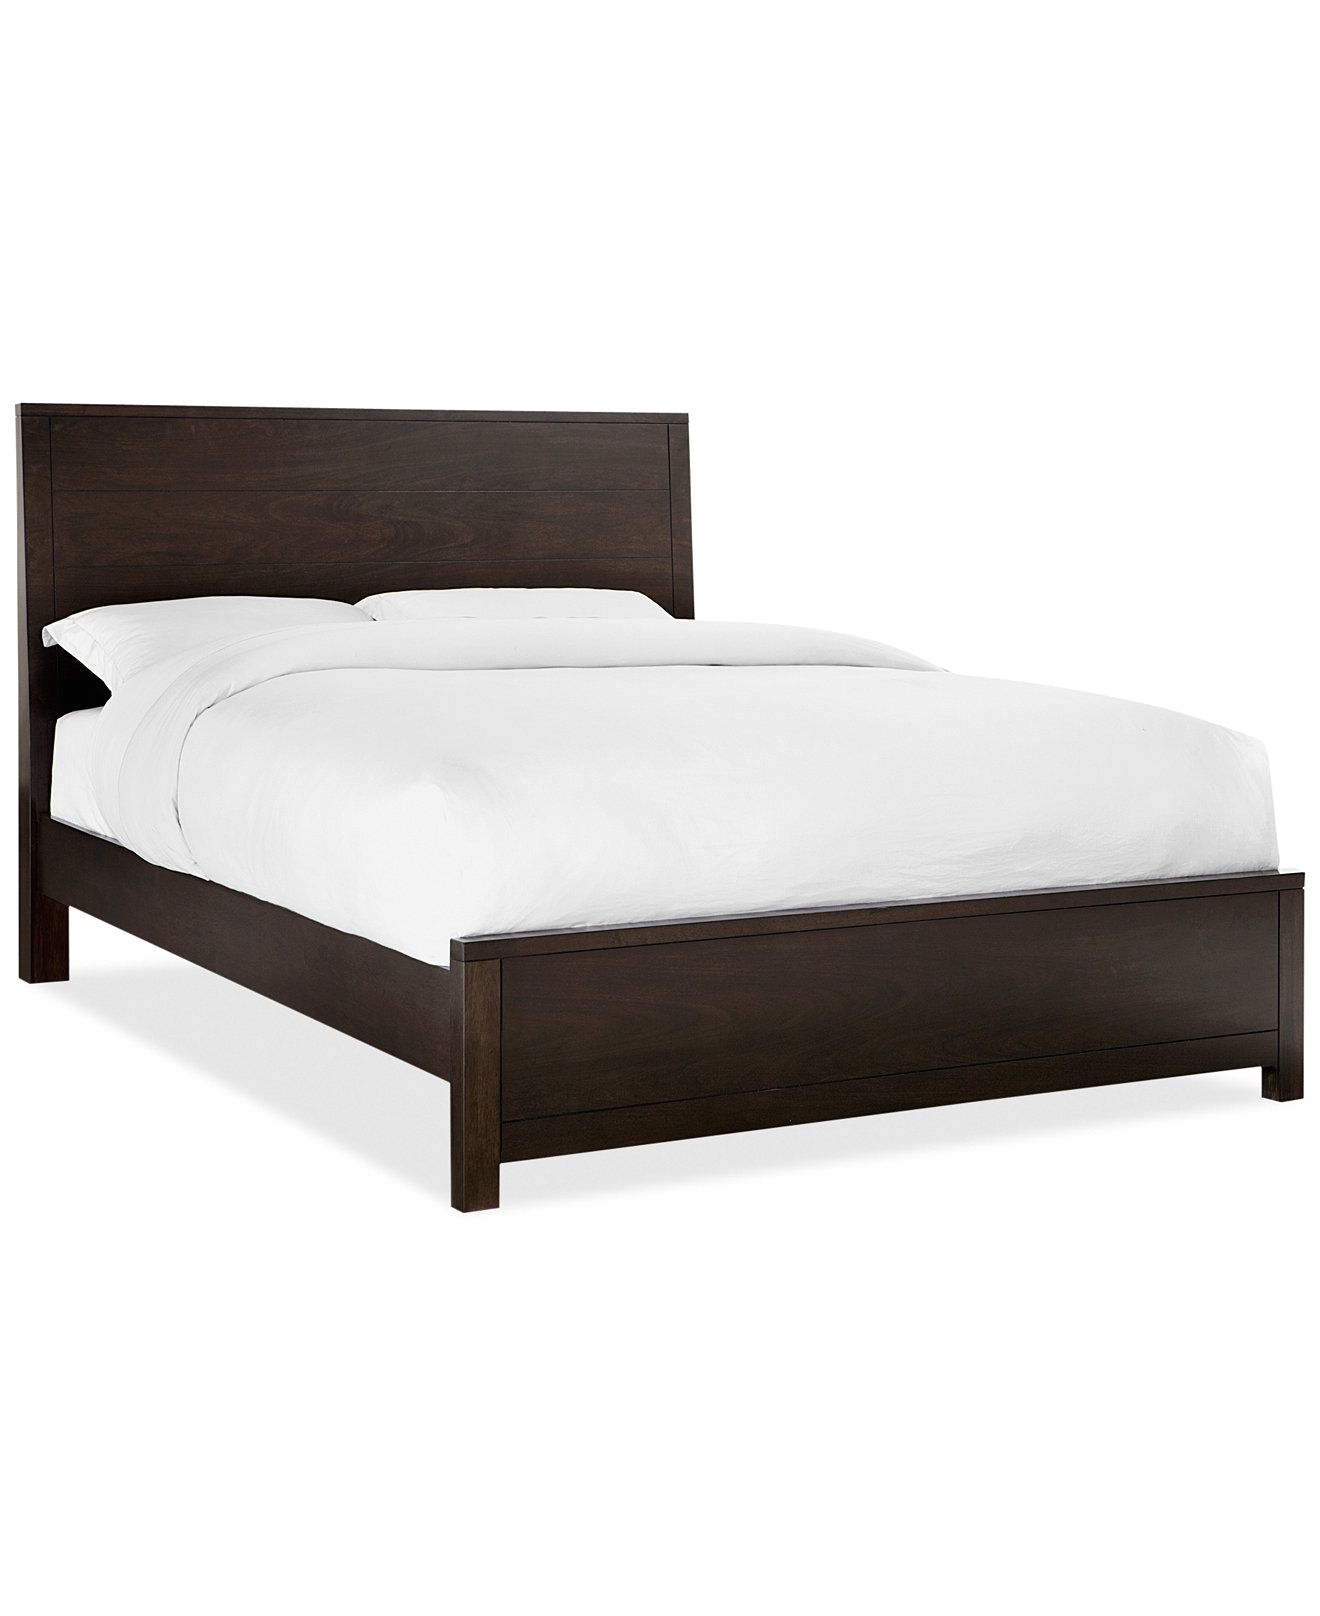 tribeca queen size bed only at macy s beds headboards furniture macy s